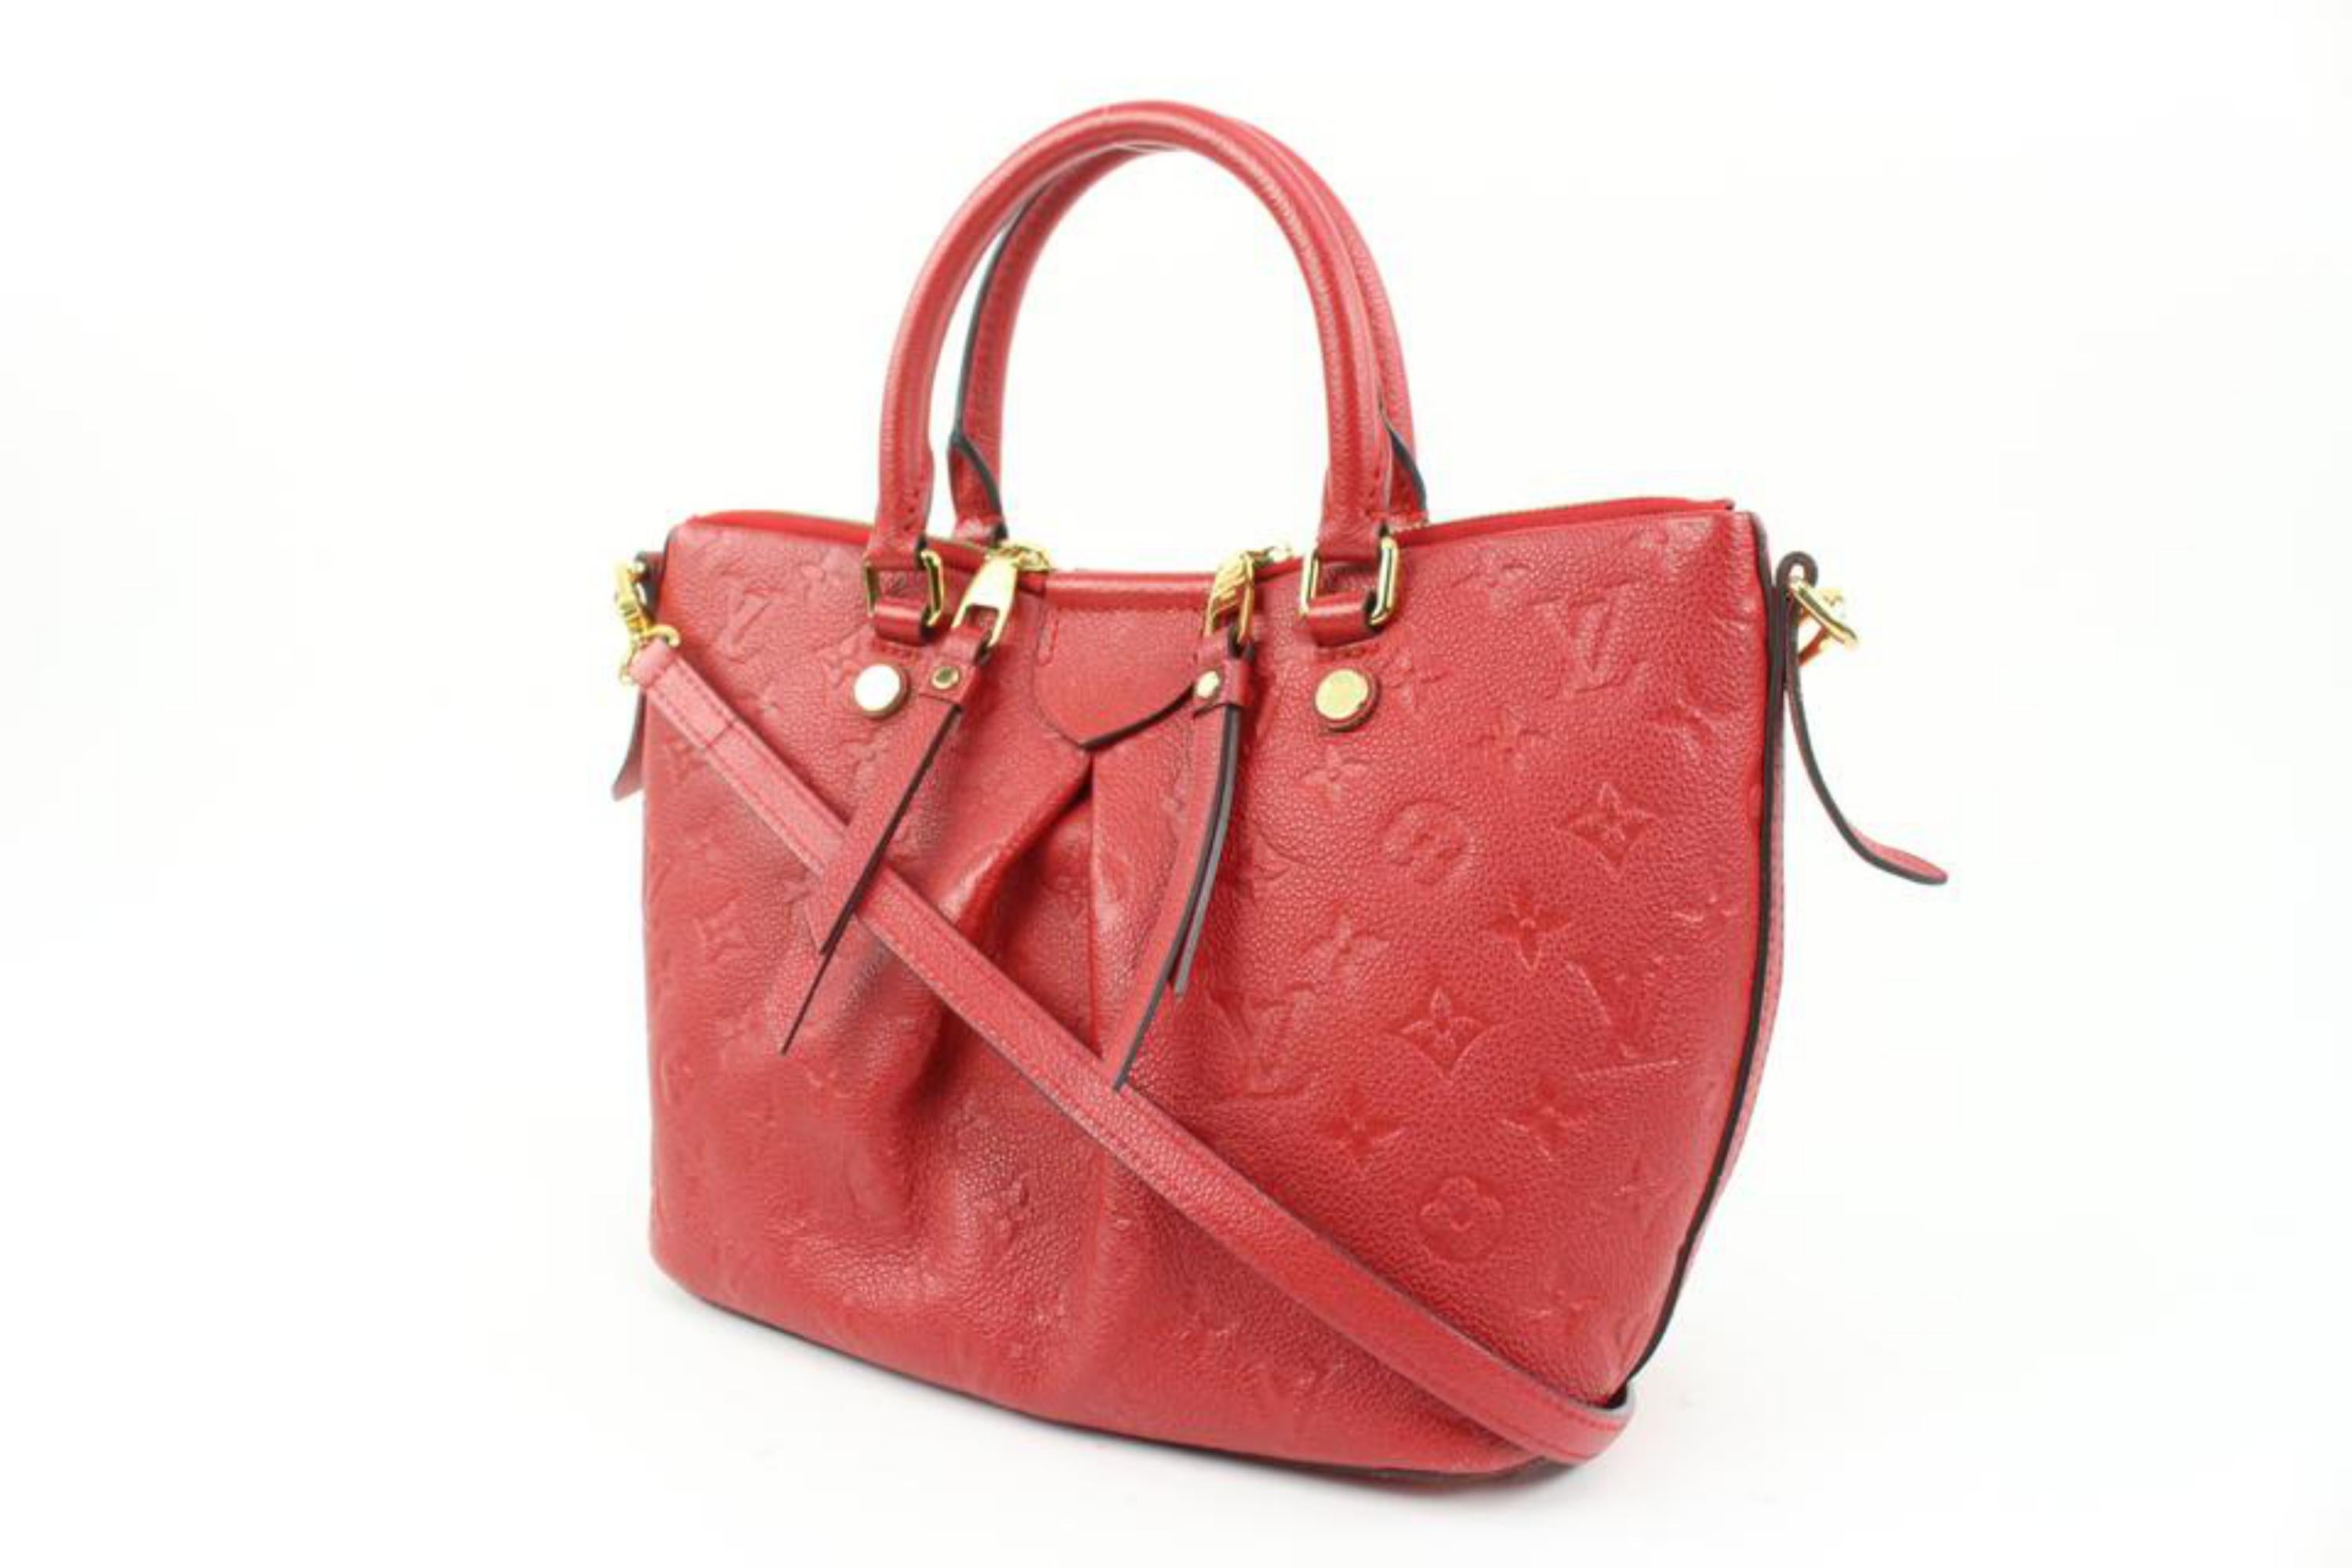 Louis Vuitton Red Monogram Leather Empreinte Mazarine PM 2way s28lv18
Date Code/Serial Number: DU0166
Made In: France
Measurements: Length:  13